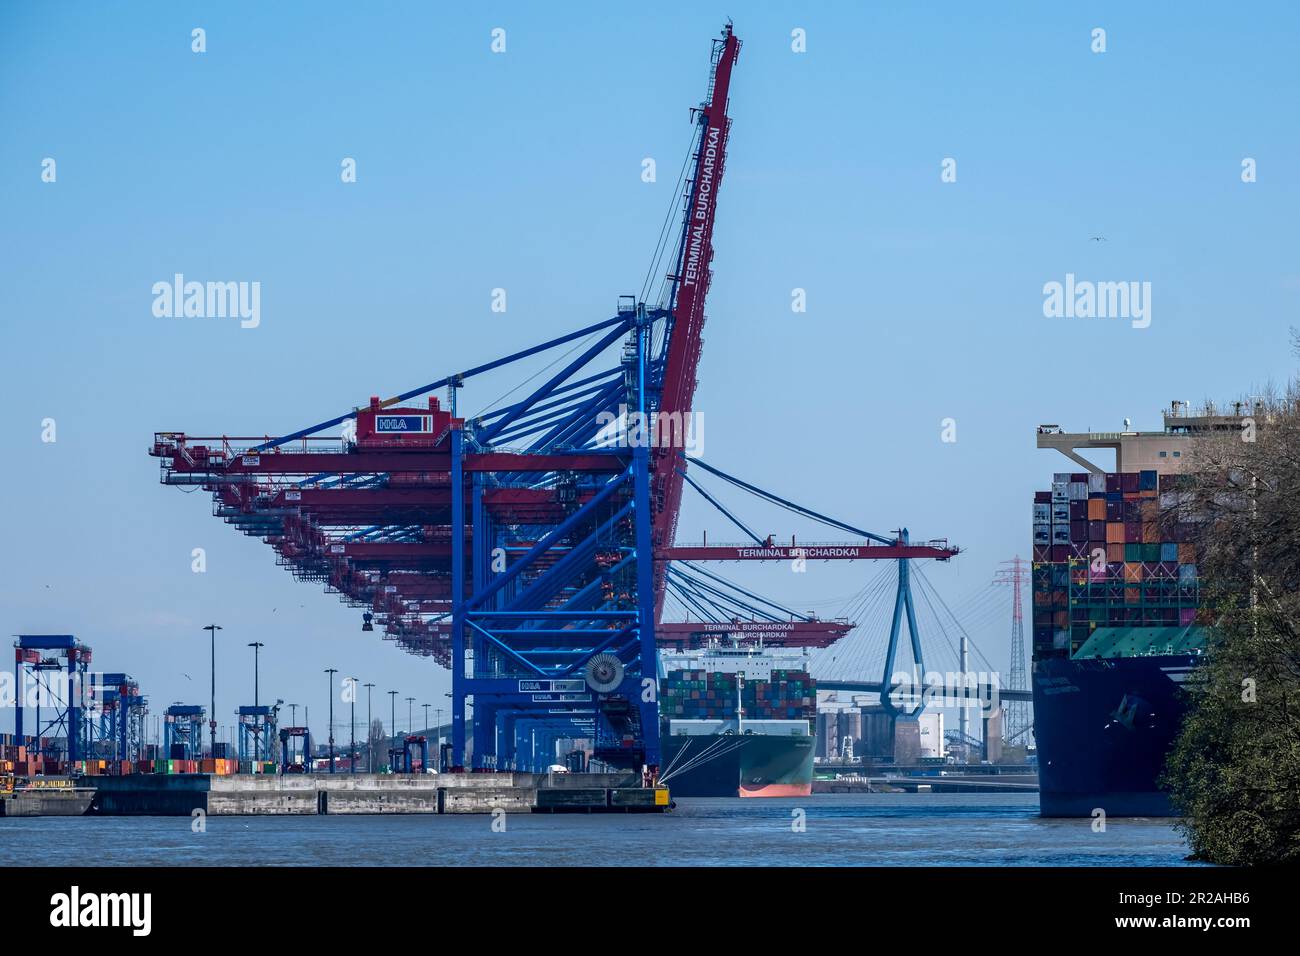 Hamburg, Germany - 04 17 2023: View of the container cranes at Burchardkai in the Port of Hamburg from the water Stock Photo